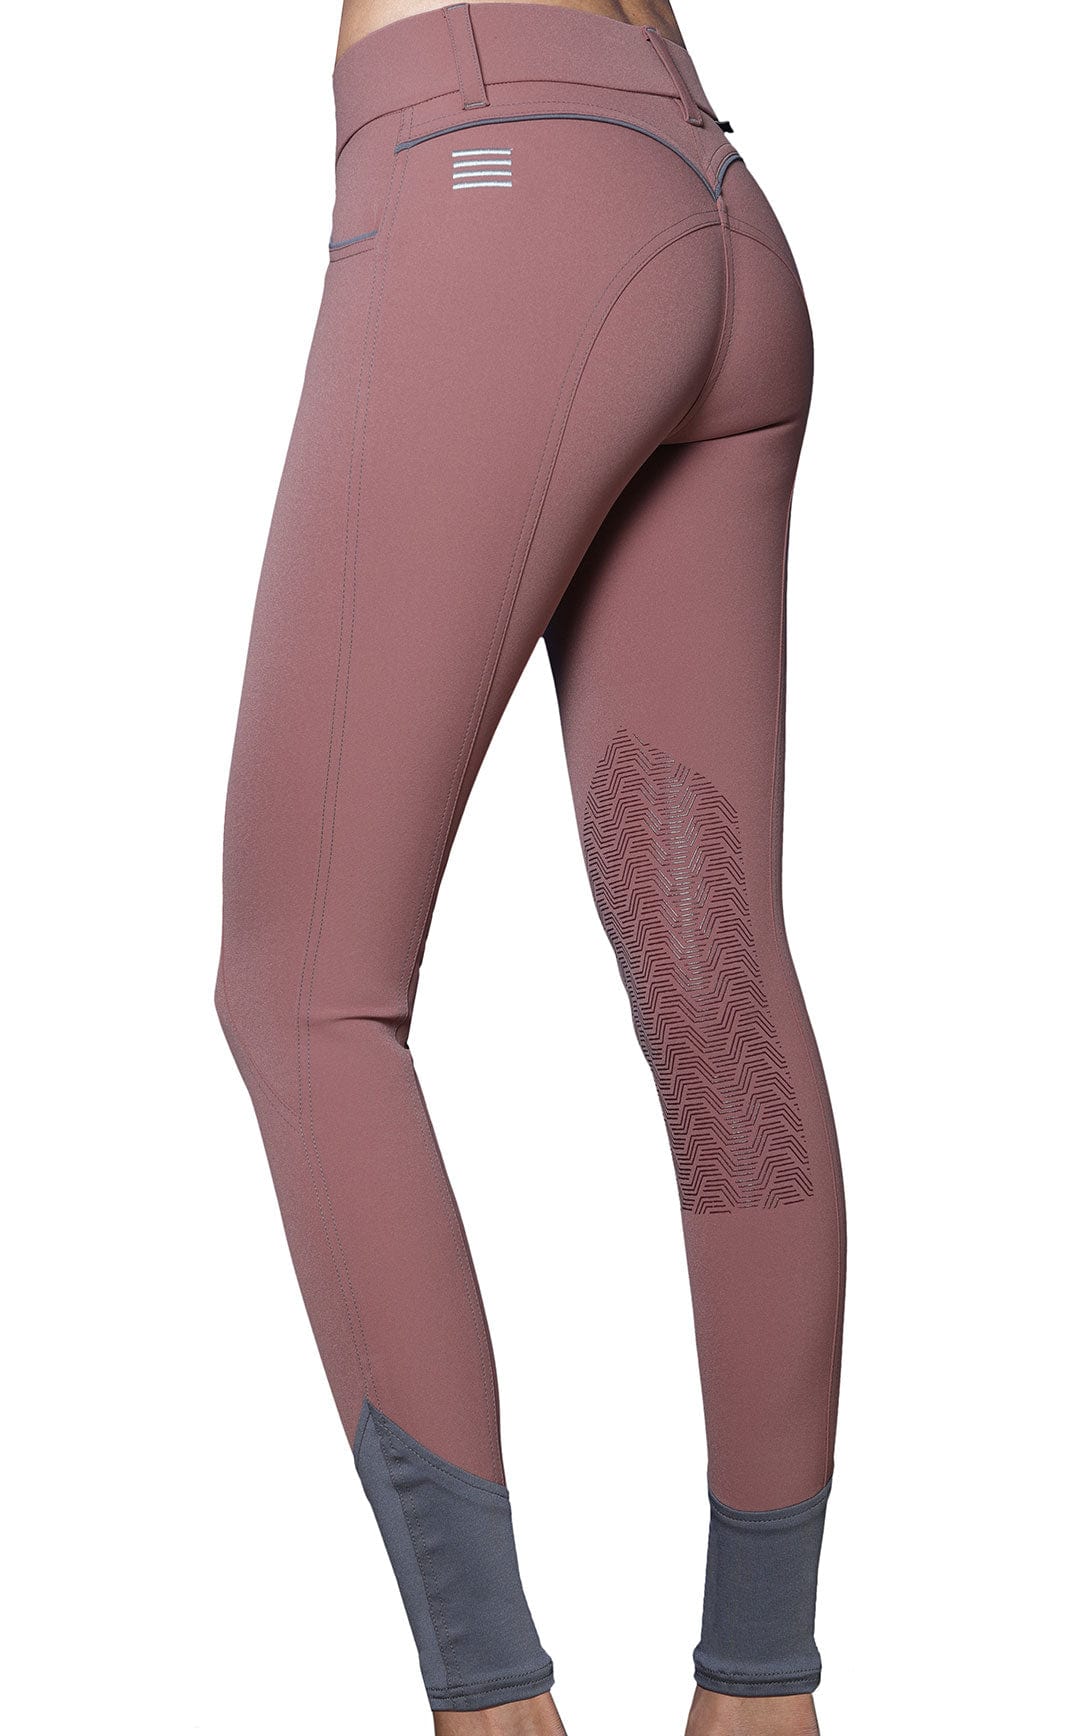 GhoDho Breeches GhoDho- Elara Breeches- Rosewood equestrian team apparel online tack store mobile tack store custom farm apparel custom show stable clothing equestrian lifestyle horse show clothing riding clothes horses equestrian tack store